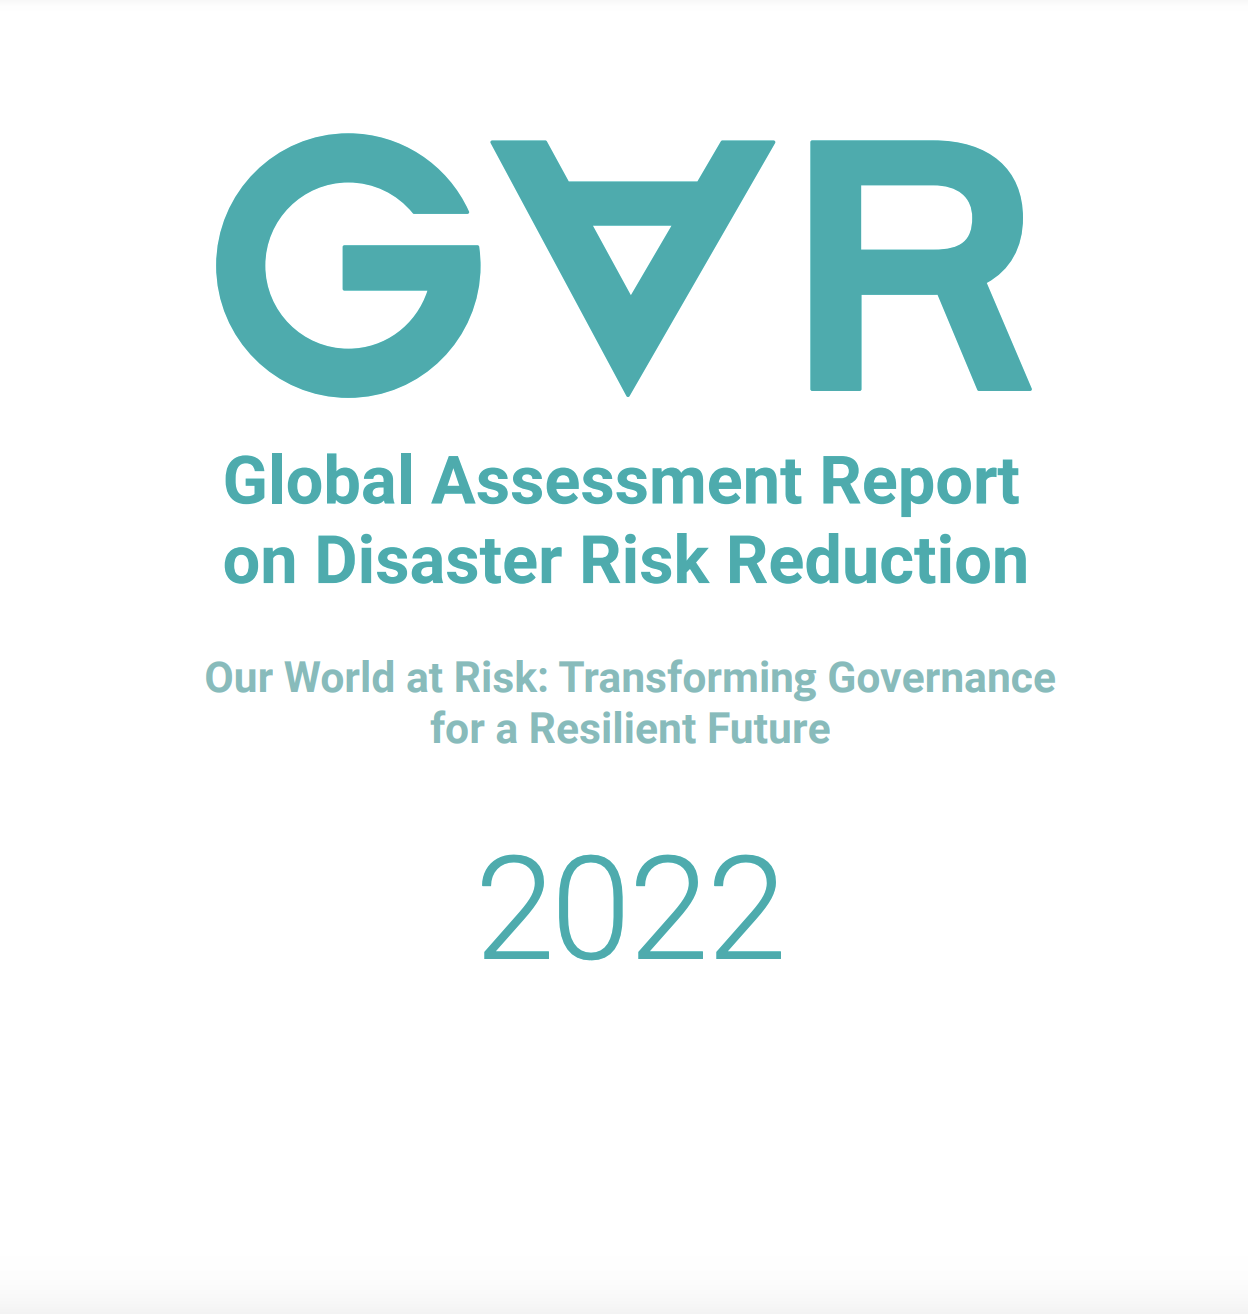 WP5 International cooperation, development and resilience- Projecting Effects of Climate Change in the framework of the INFORM Risk Index. UN Global Assessment Report 2022